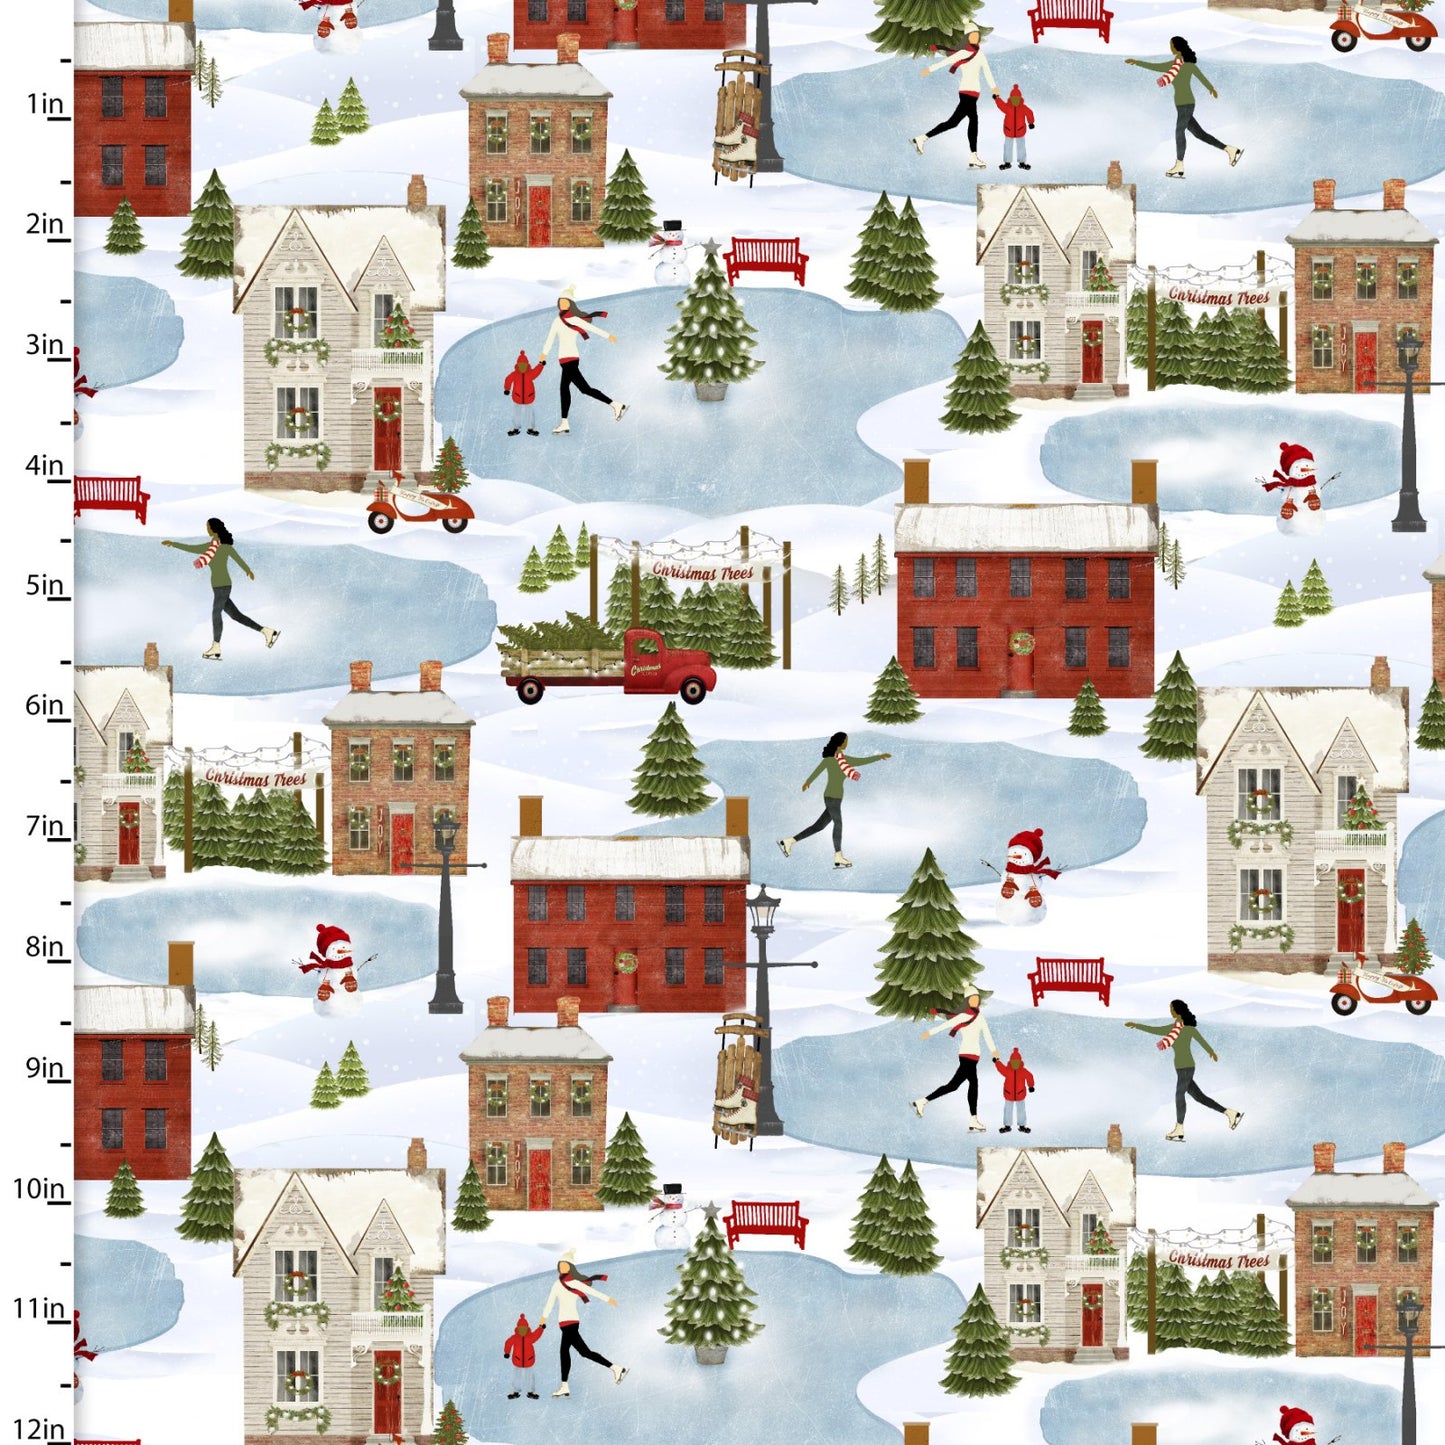 3 Wishes Fabric -  A Christmas to Remember - Skating Village - White